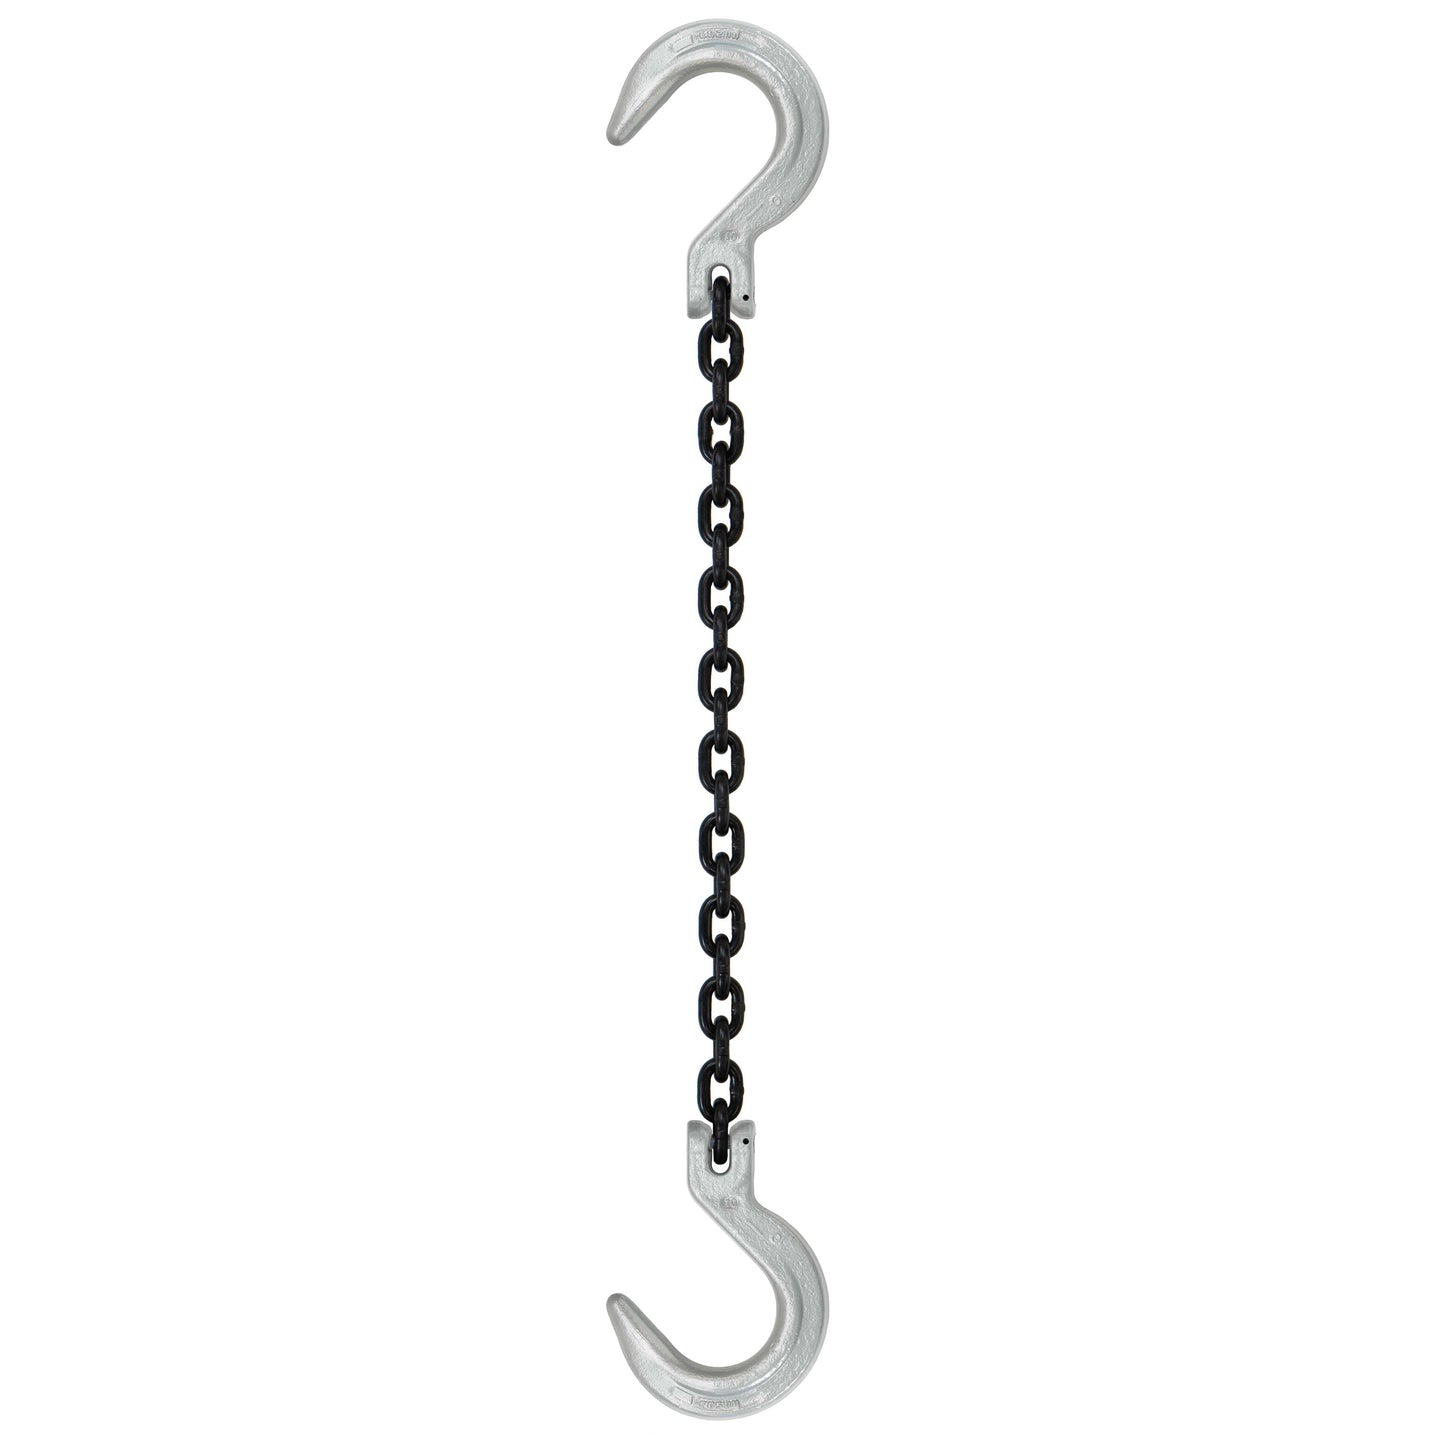 932 inch x 18 foot Domestic Single Leg Chain Sling w Crosby Foundry & Foundry Hooks Grade 100 image 1 of 2